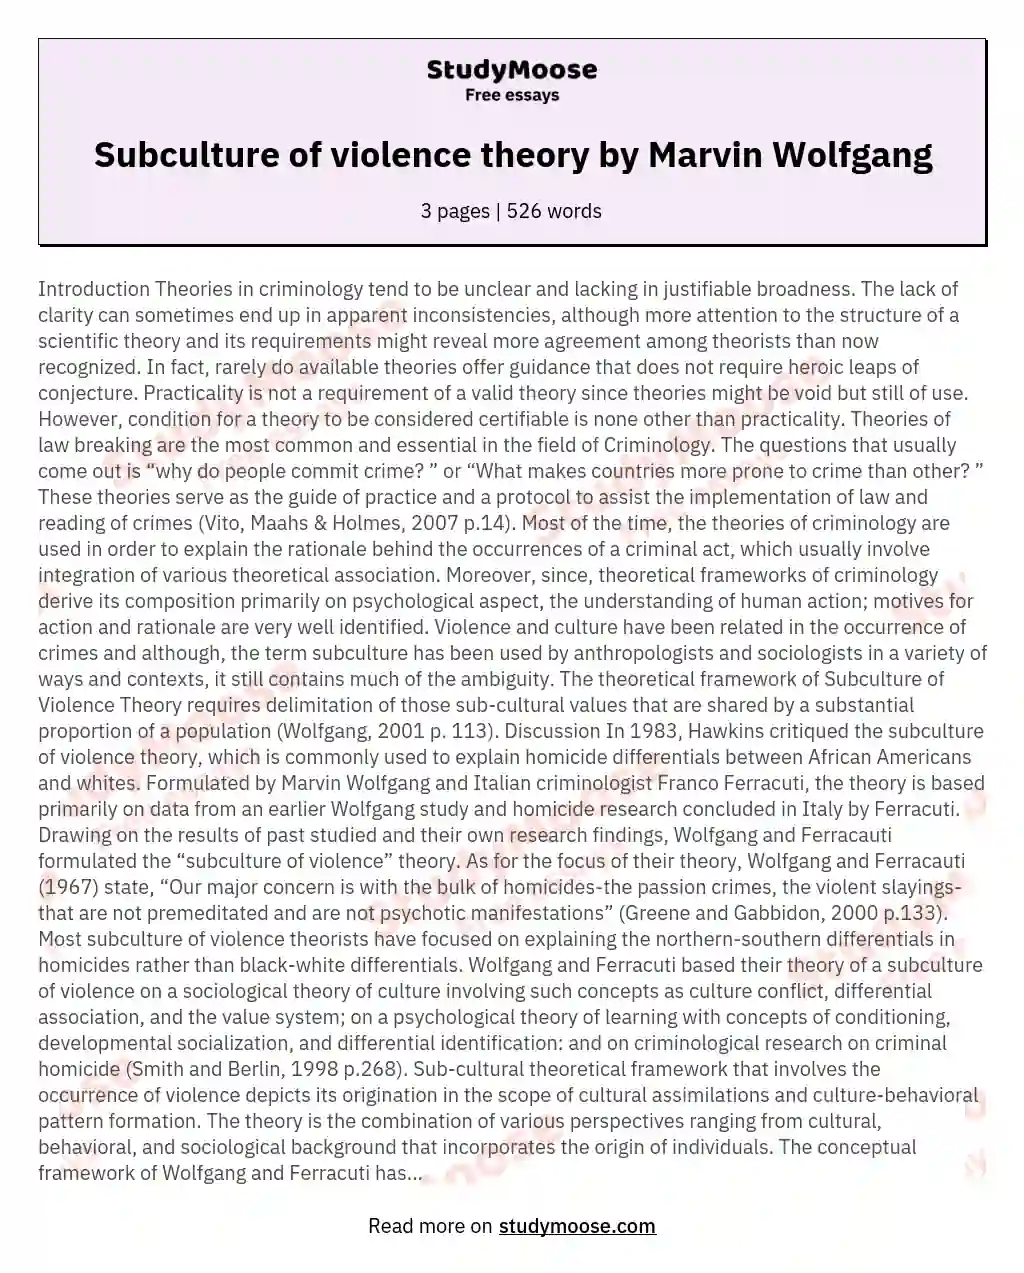 Subculture of violence theory by Marvin Wolfgang